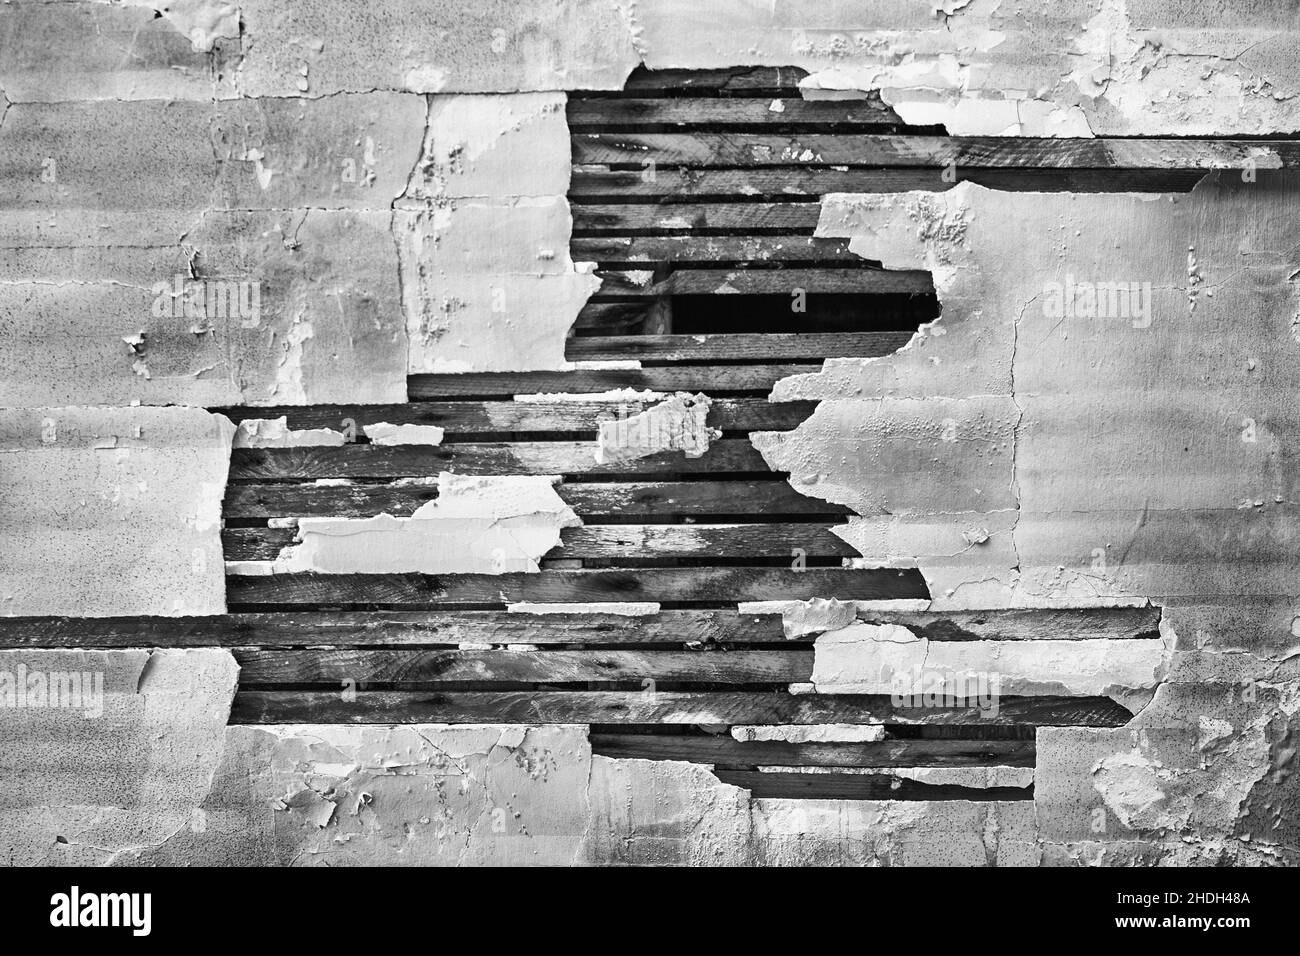 texture, structure, cracked, textures, structures, crackeds Stock Photo